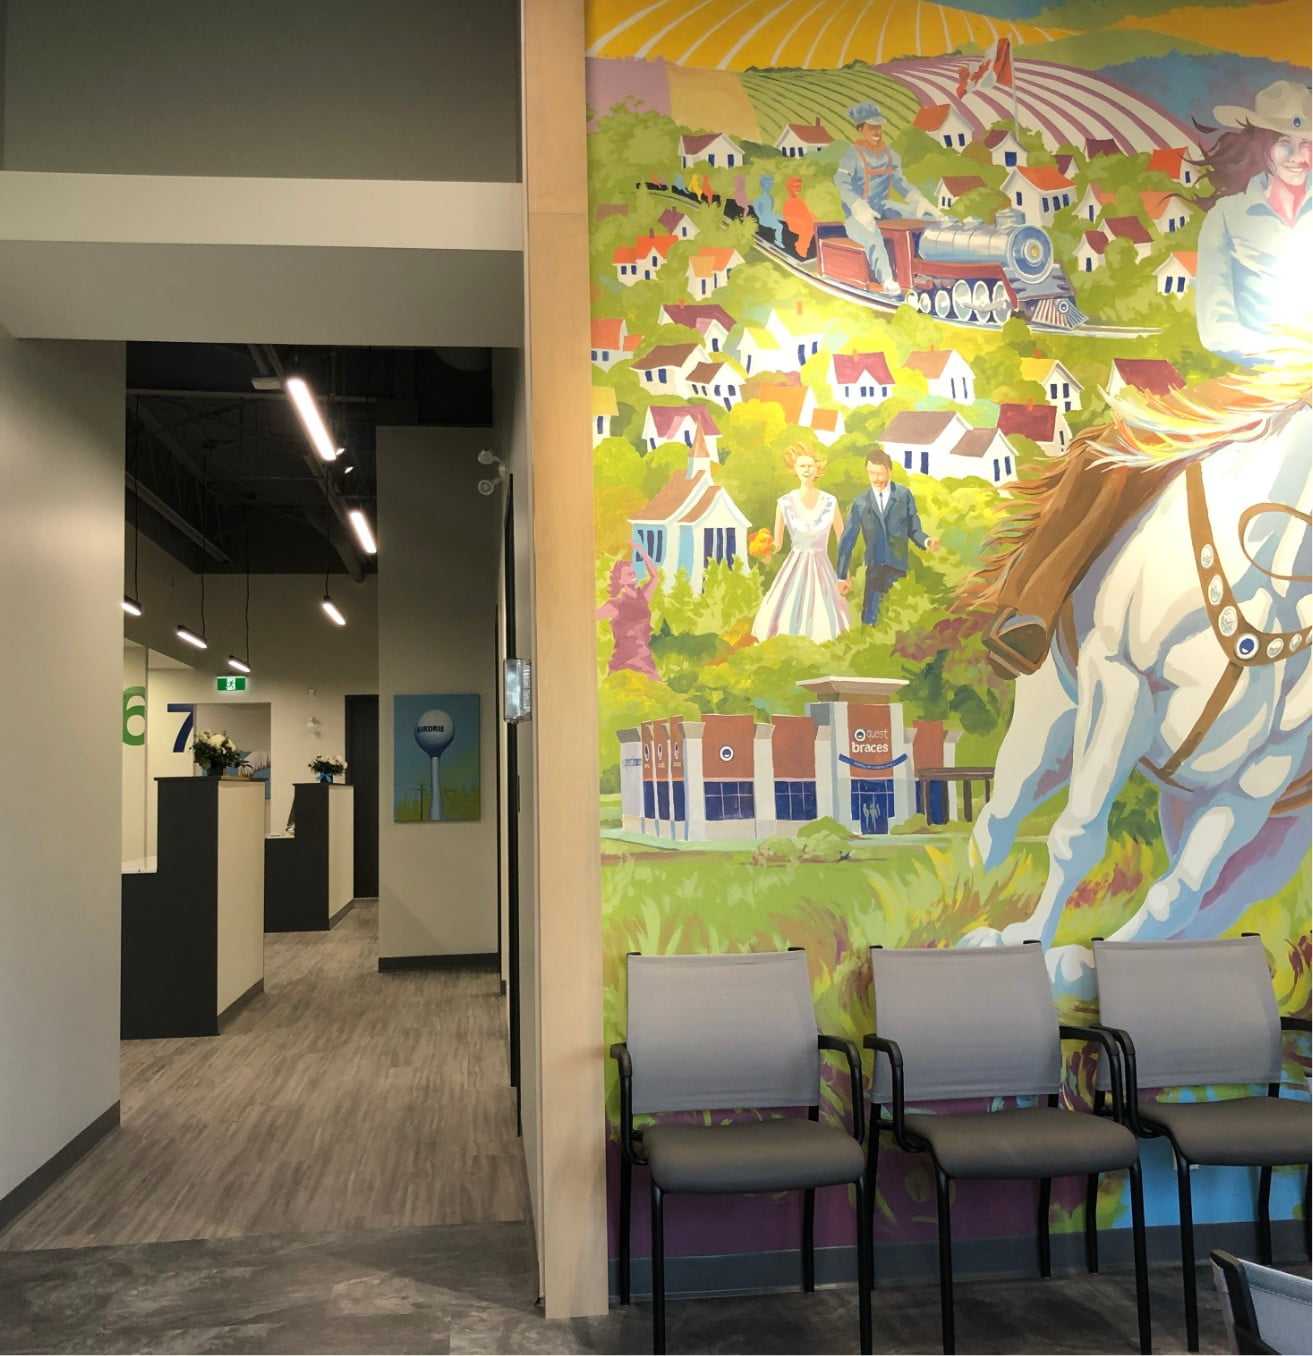 A picture of a mural in the Quest Braces office.